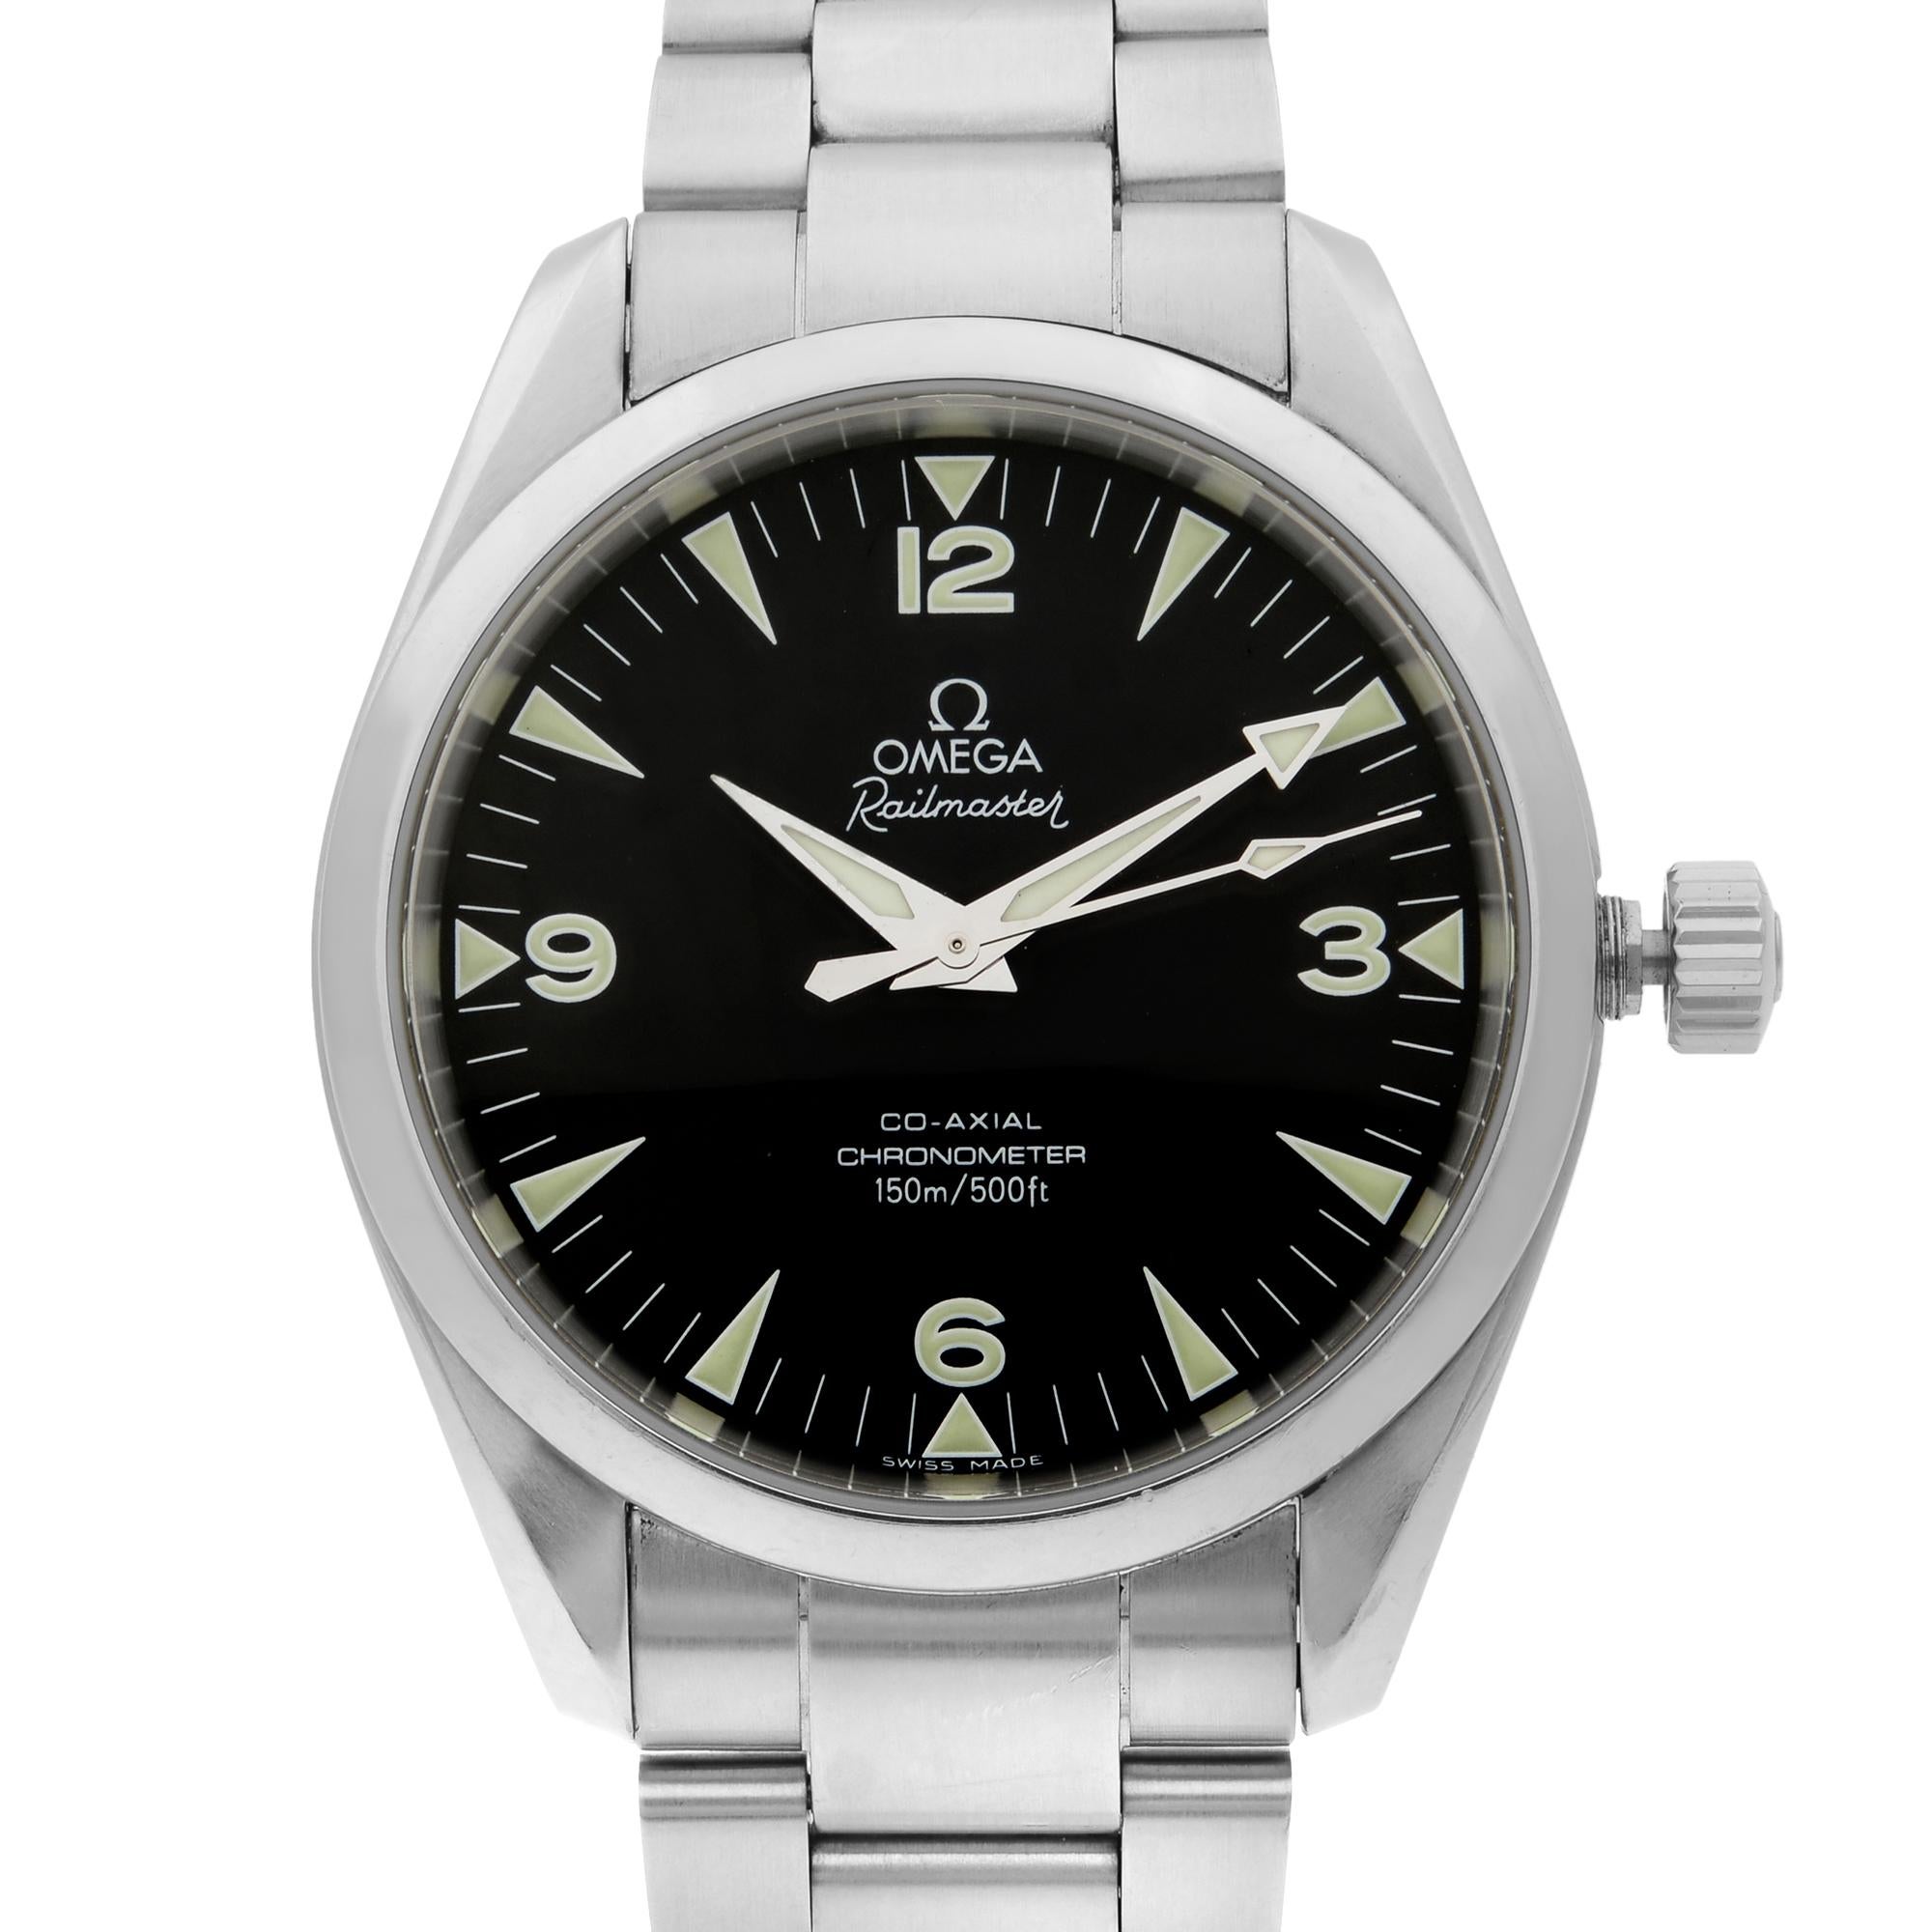 This pre-owned Omega Seamaster  2503.52.00 is a beautiful men's timepiece that is powered by mechanical (automatic) movement which is cased in a stainless steel case. It has a round shape face, no features dial and has hand sticks & numerals style